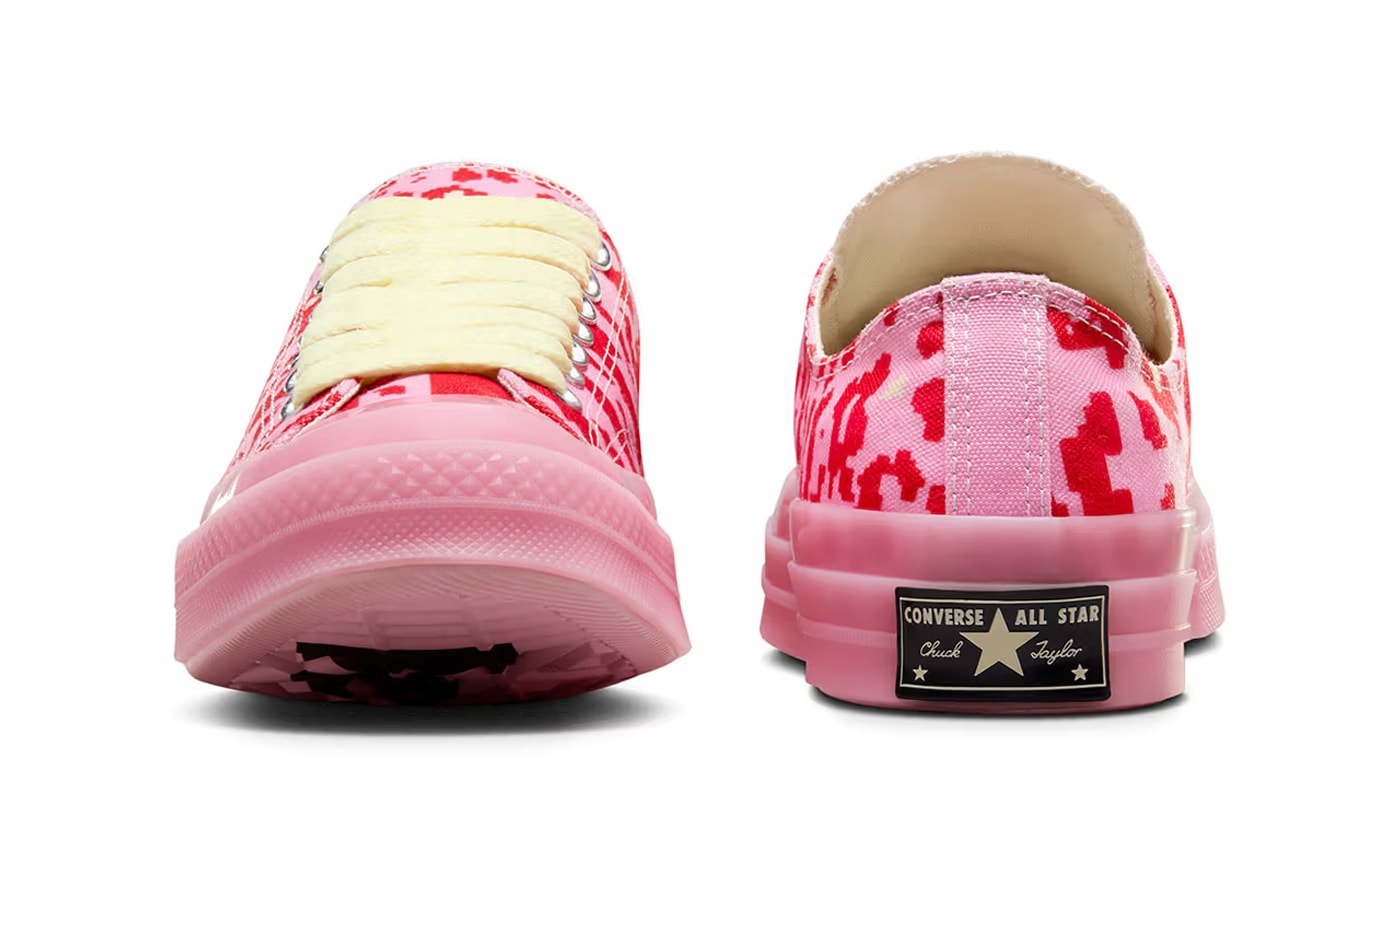 golf le fleur tyler the creator converse chuck 70 low digital leopard pink beige blue green release date info store list buying guide photos price 